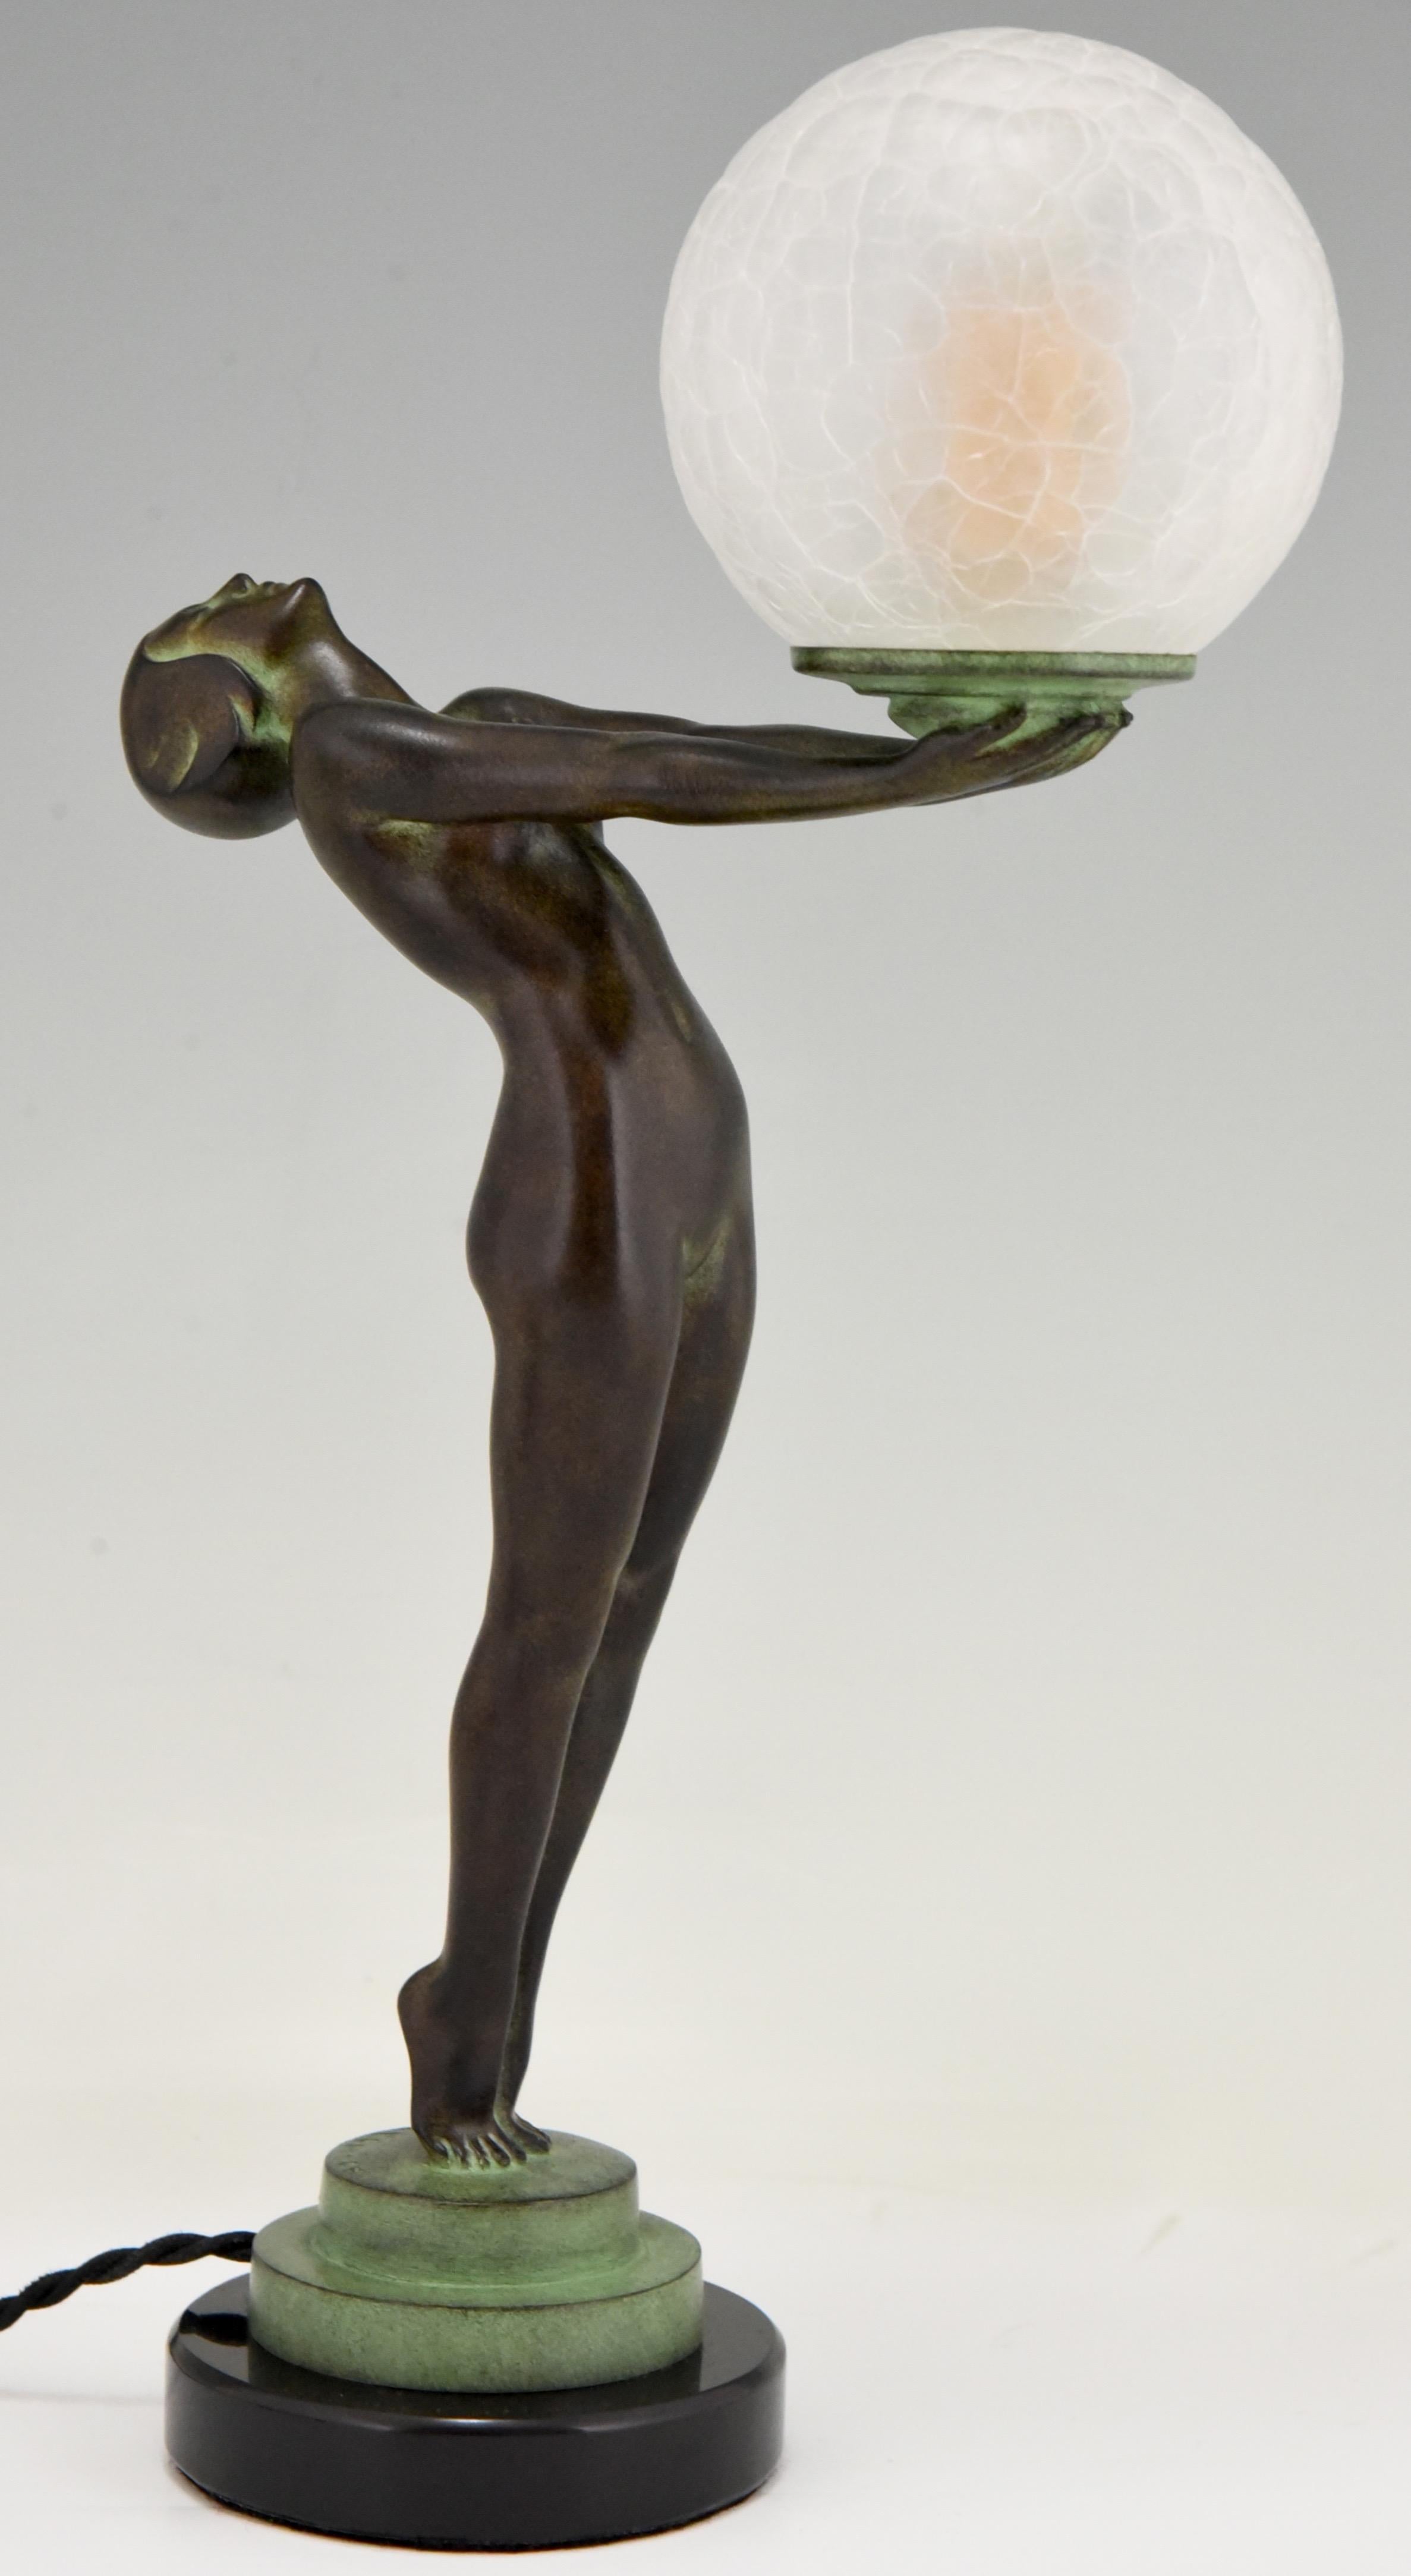 French Art Deco Style Lamp Clarté Standing Nude Holding a Glass Shade Max Le Verrier 